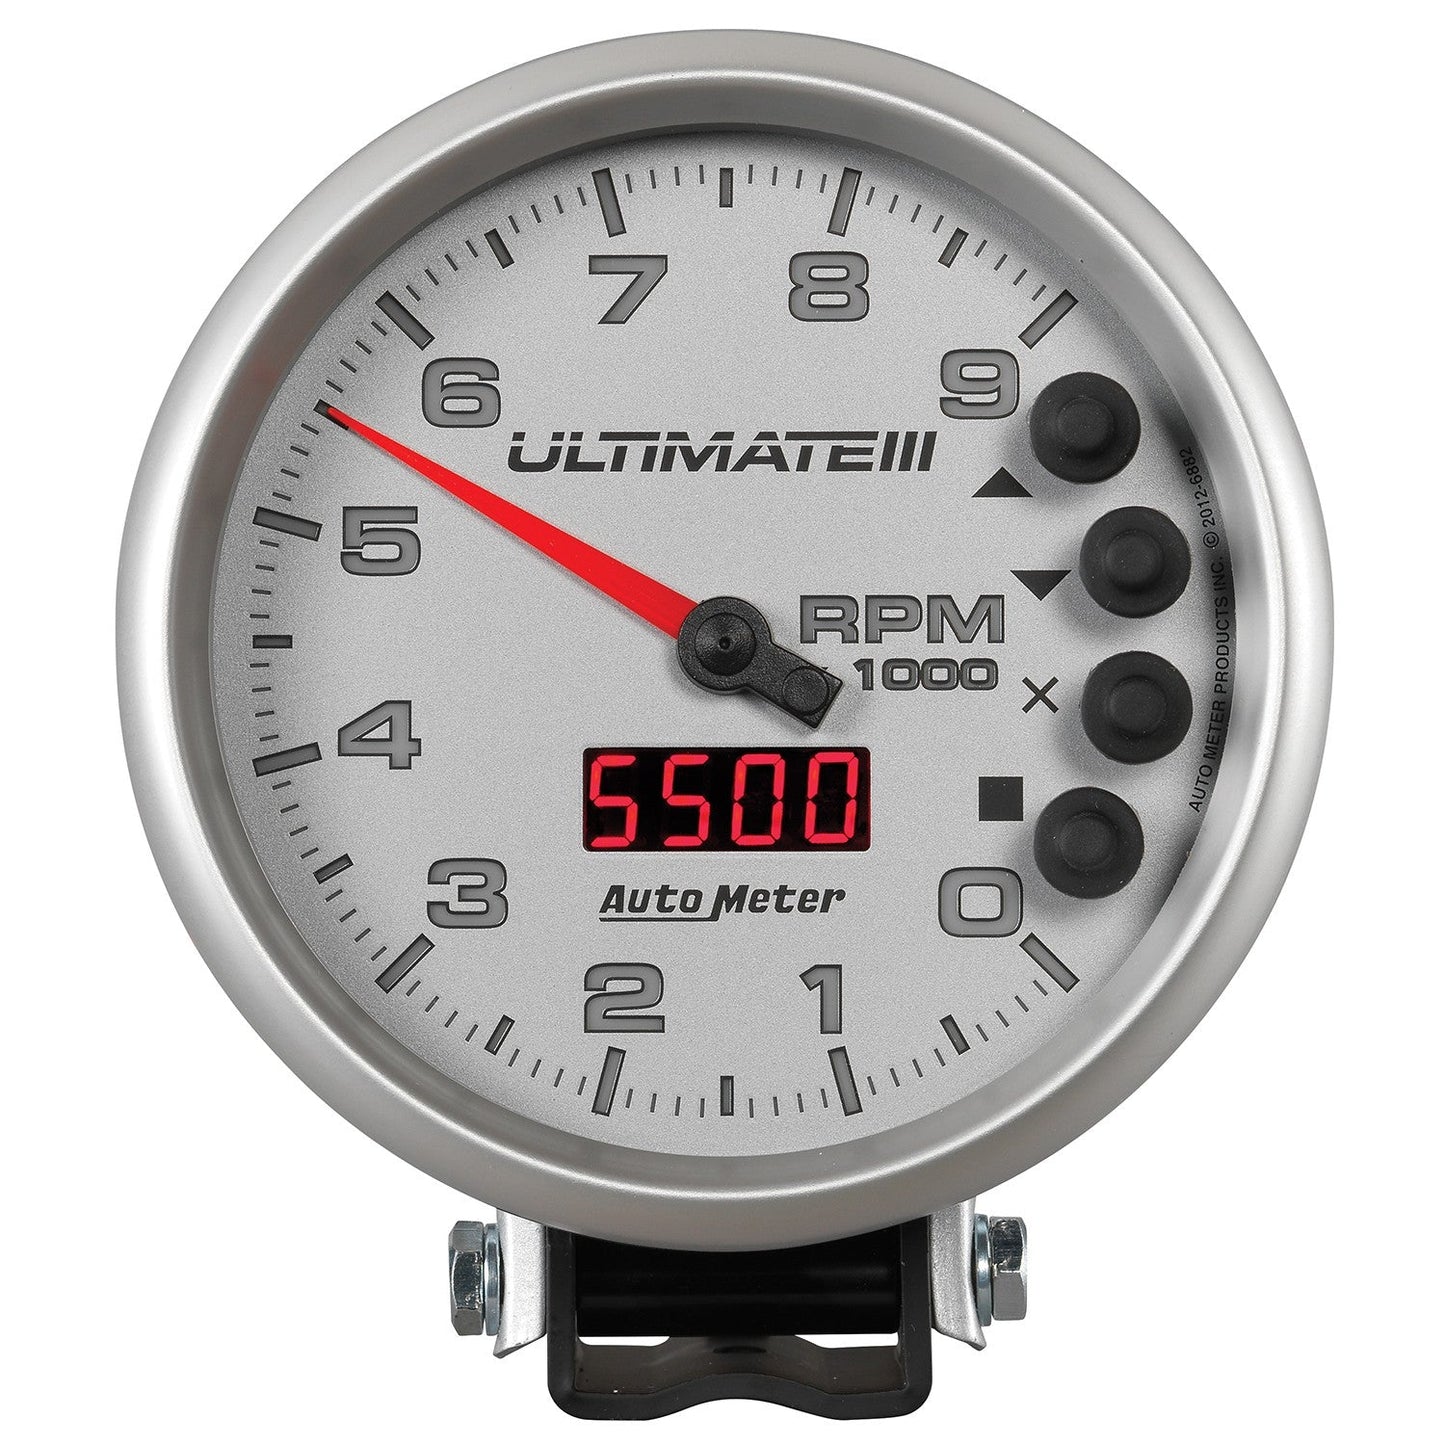 AutoMeter - 5" TACHOMETER, 0-9000 RPM, PEDESTAL, ULTIMATE III PLAYBACK, SILVER (6882)